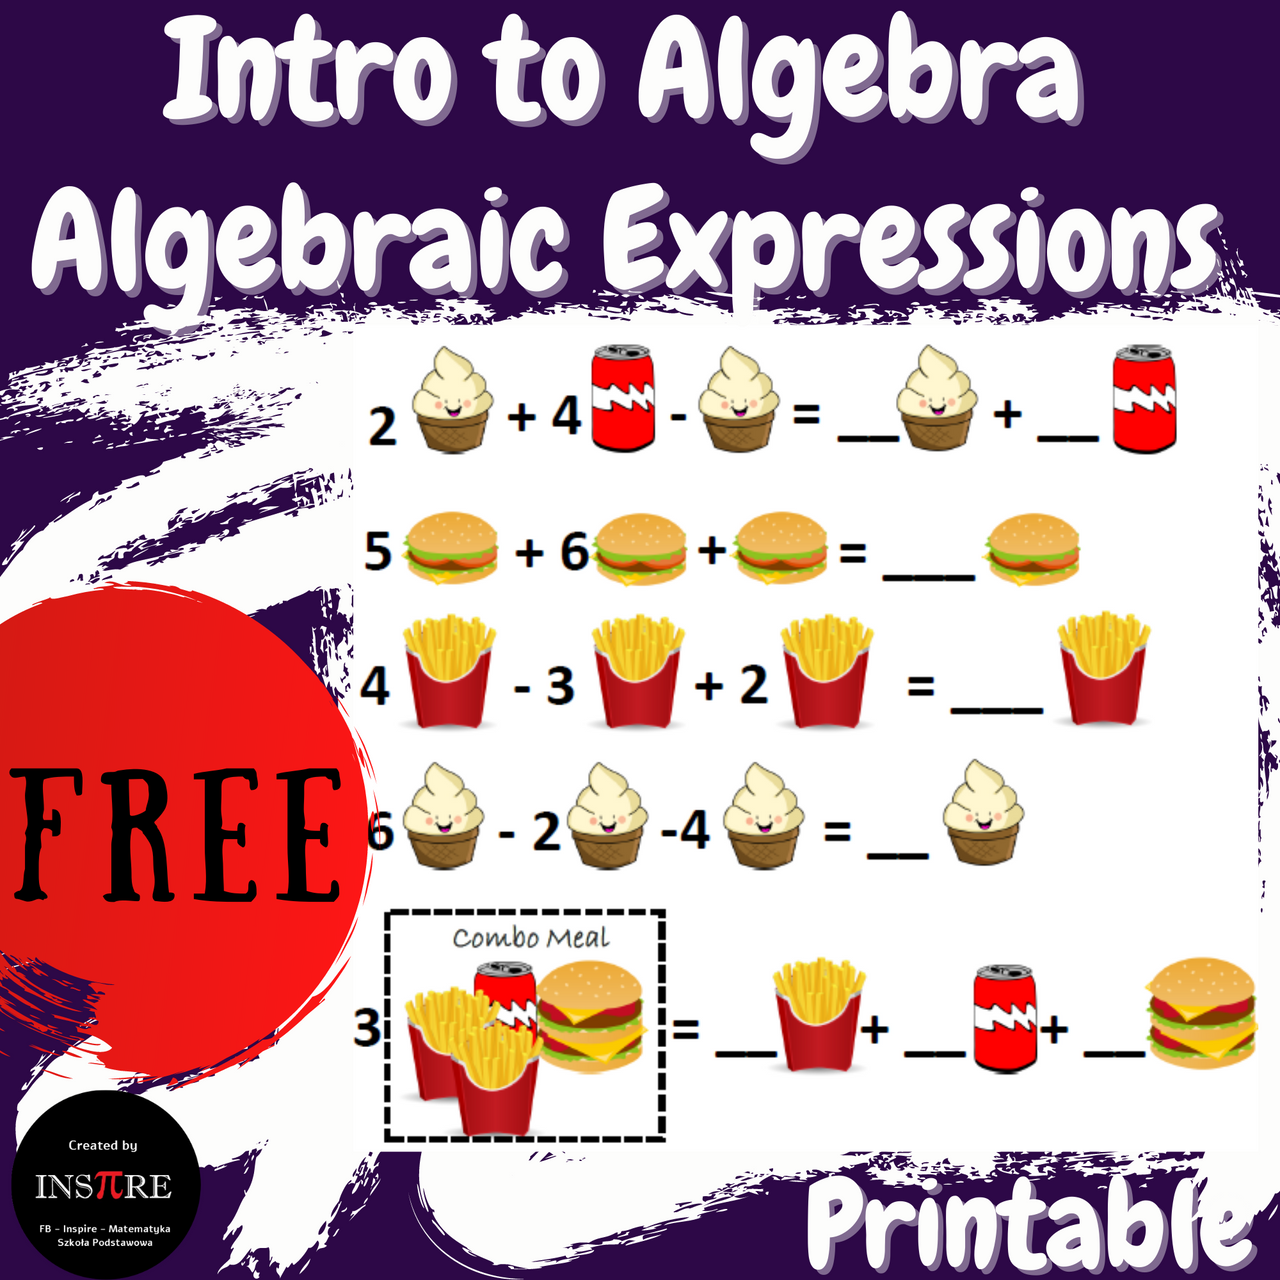 FREE Algebra INTRO to Algebraic Expressions Combining Like Terms Food Printable